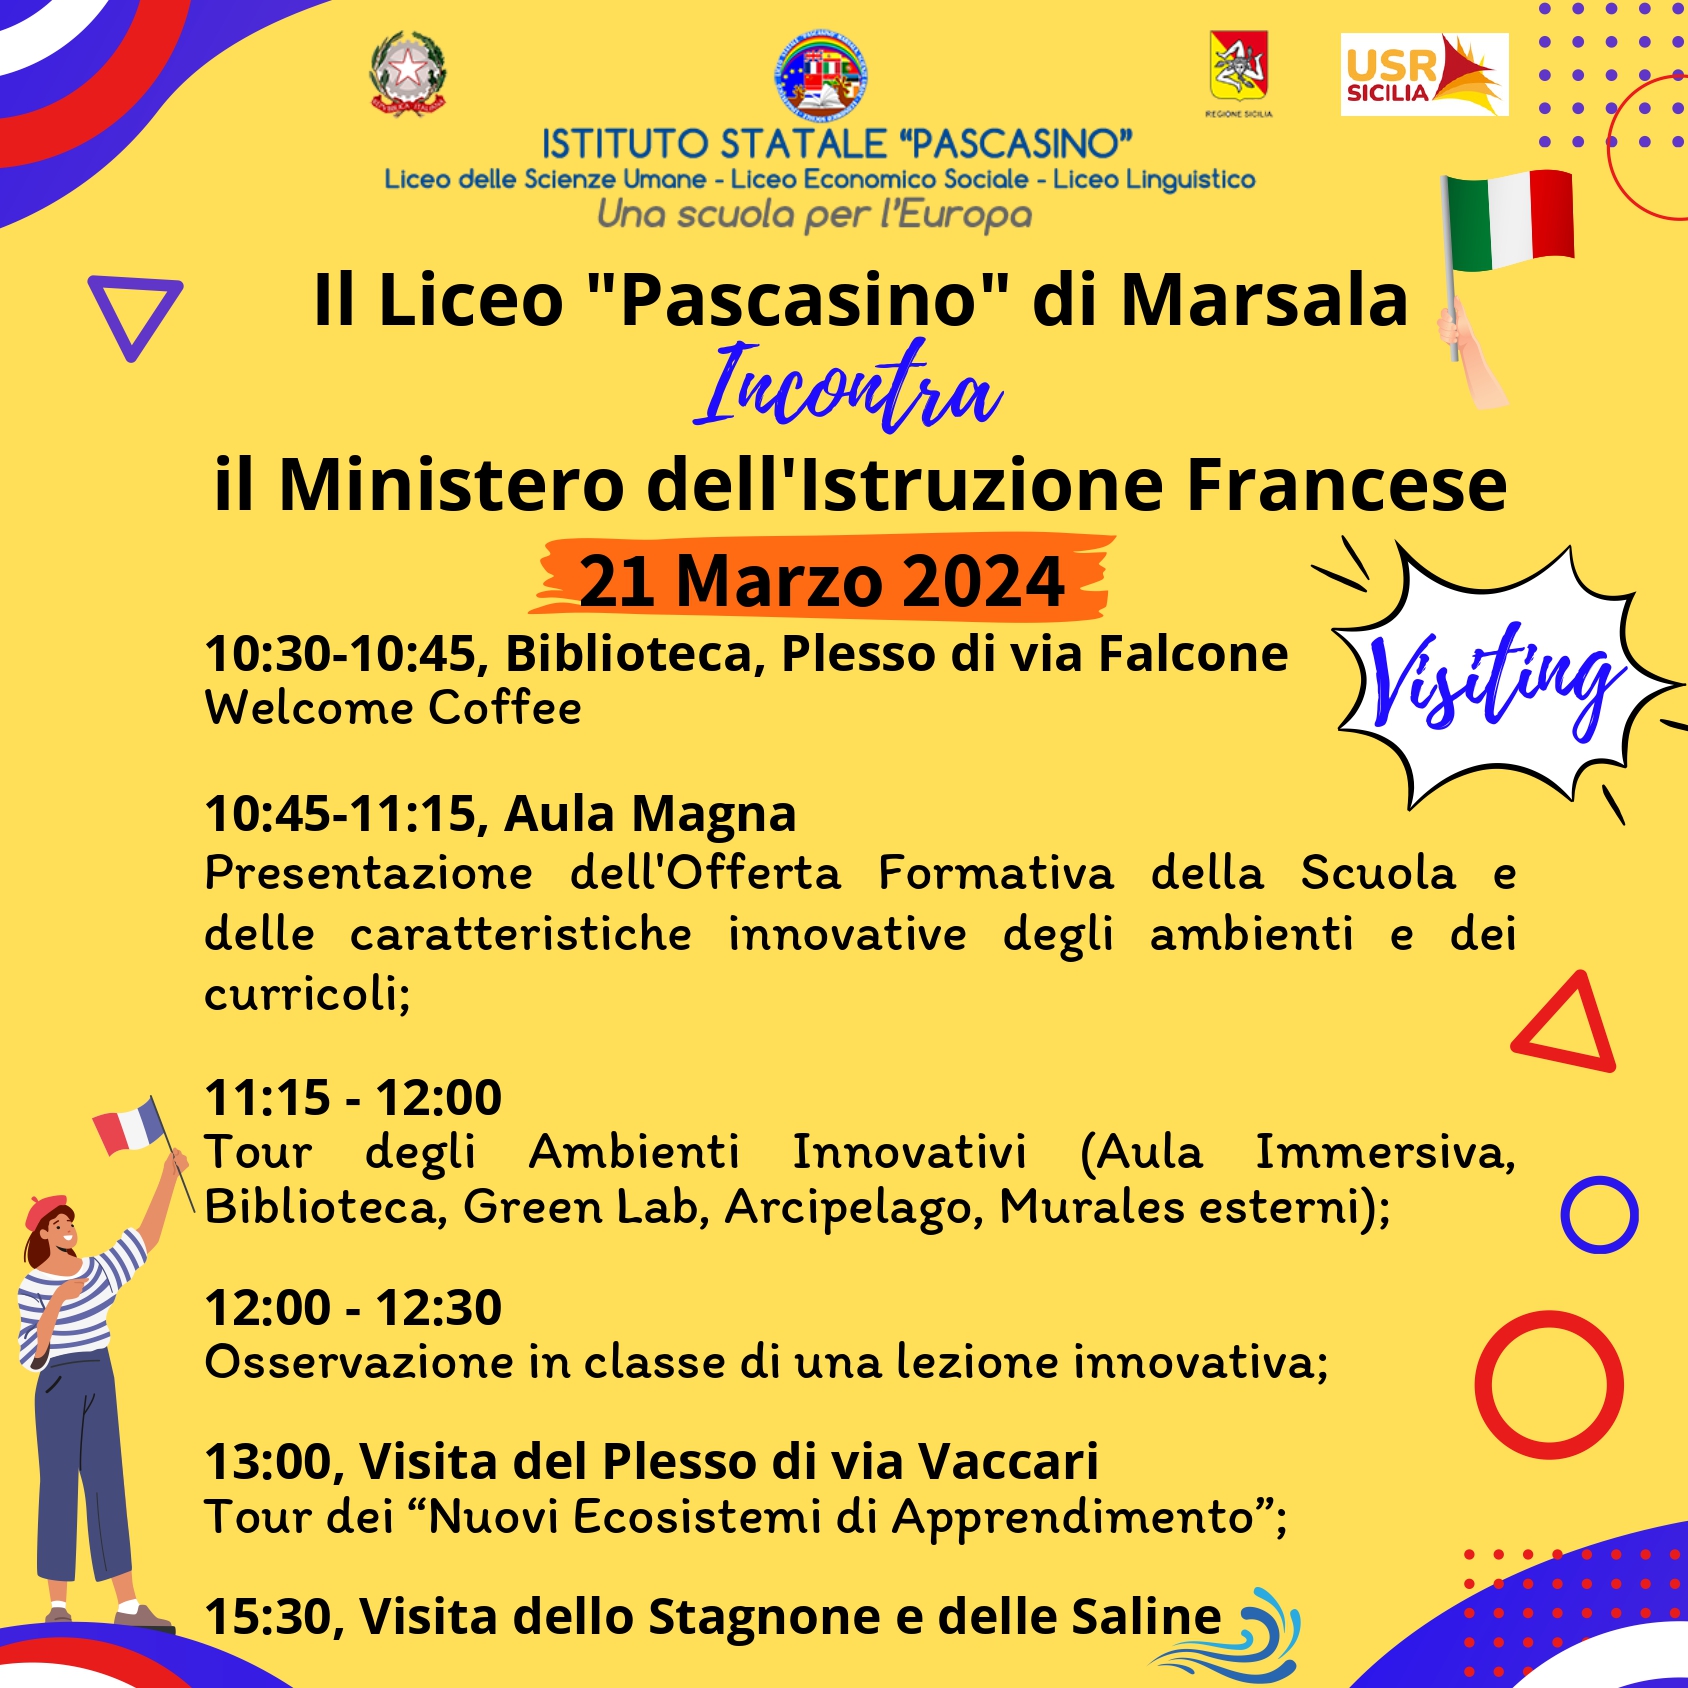 Visiting Scuola francese page 0001